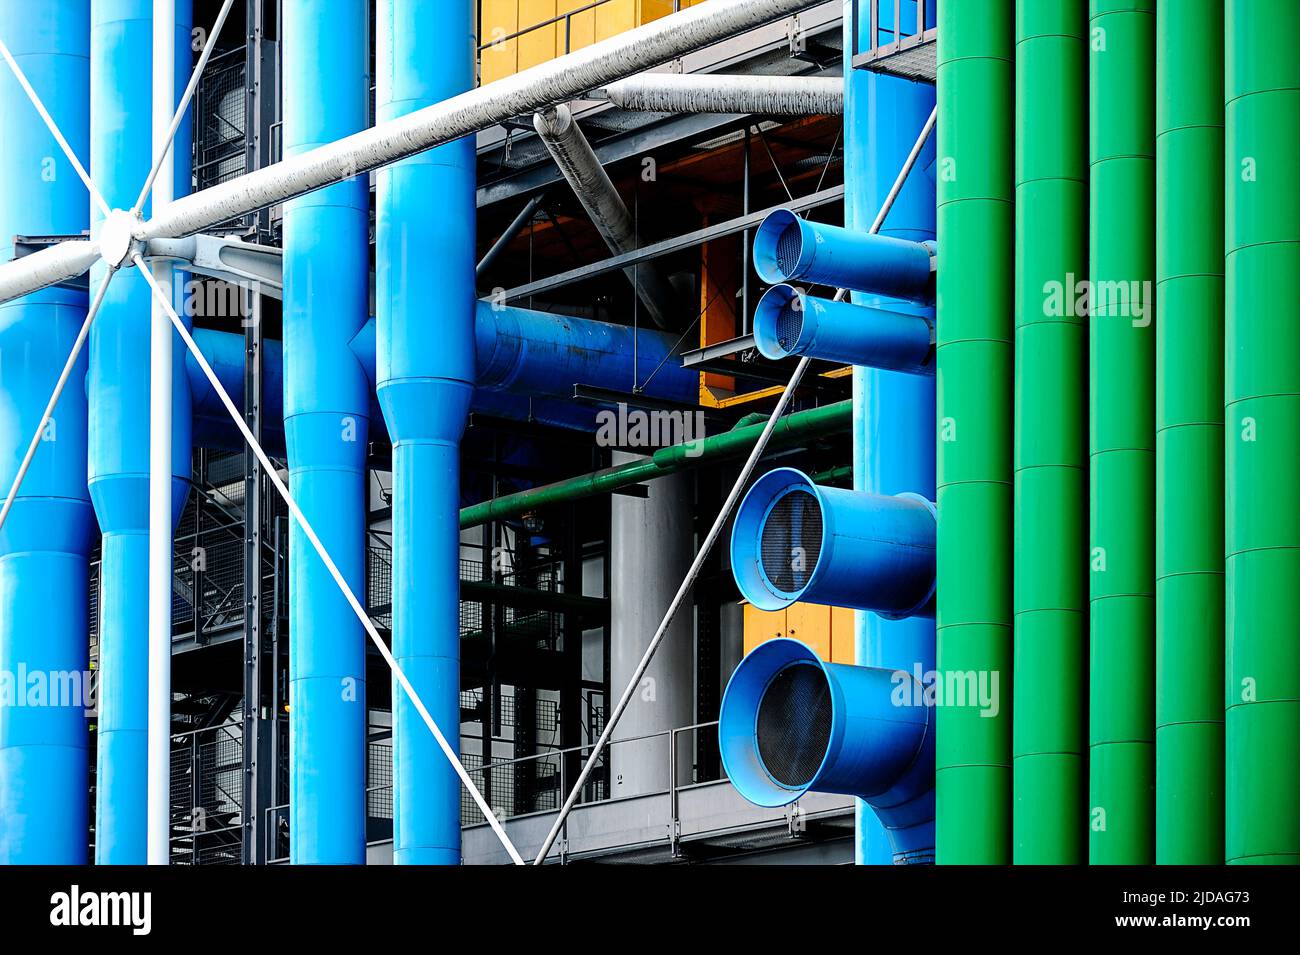 The Centre Pompidou building in Paris, exterior blue and green pipes. Stock Photo